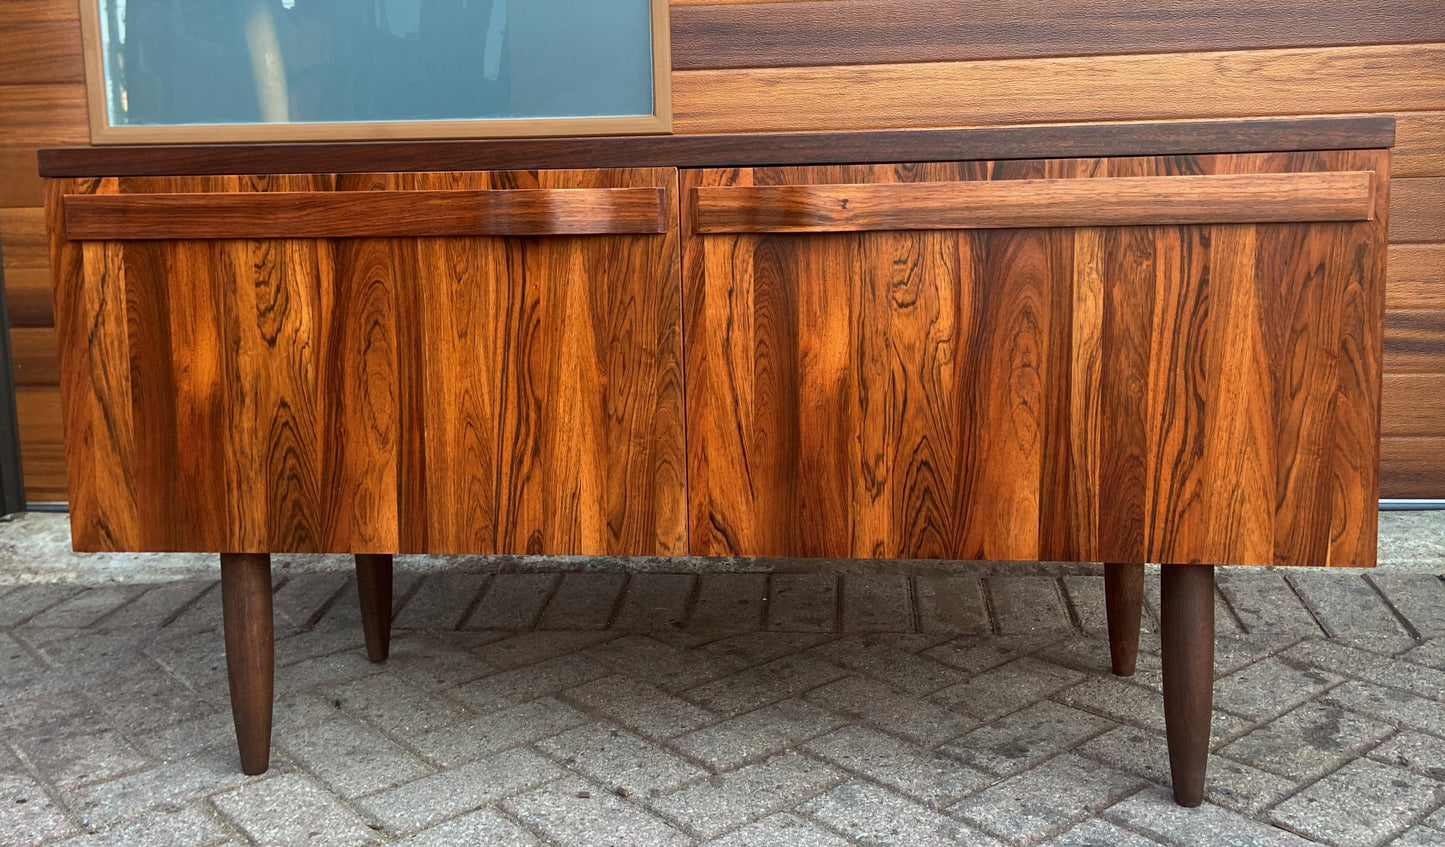 REFINISHED Swedish Mid Century Modern Rosewood Credenza by Troeds 51"